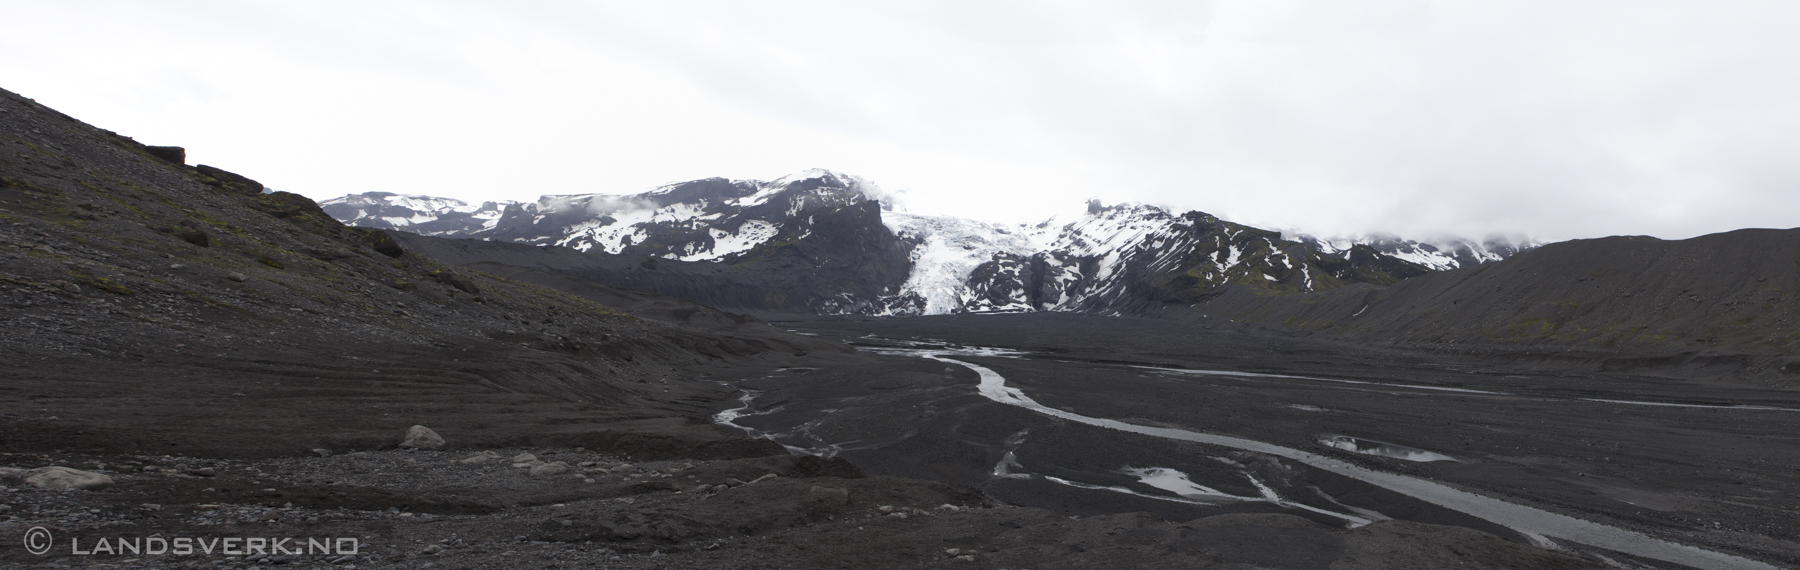 Eyjafjallajökull, with one of it's glacier tongues stretching out. Before the eruption in 2010 this whole area was a gigantig glacier lagoon 30-40 meters deep, now it's been filled with gravel and ash as a result from lots of melted ice caused by the eruption of the volcano under Eyjafjallajökull. The whole process took 6 hours.

(Canon EOS 5D Mark II / Canon EF 24-70mm f/2.8 L USM)